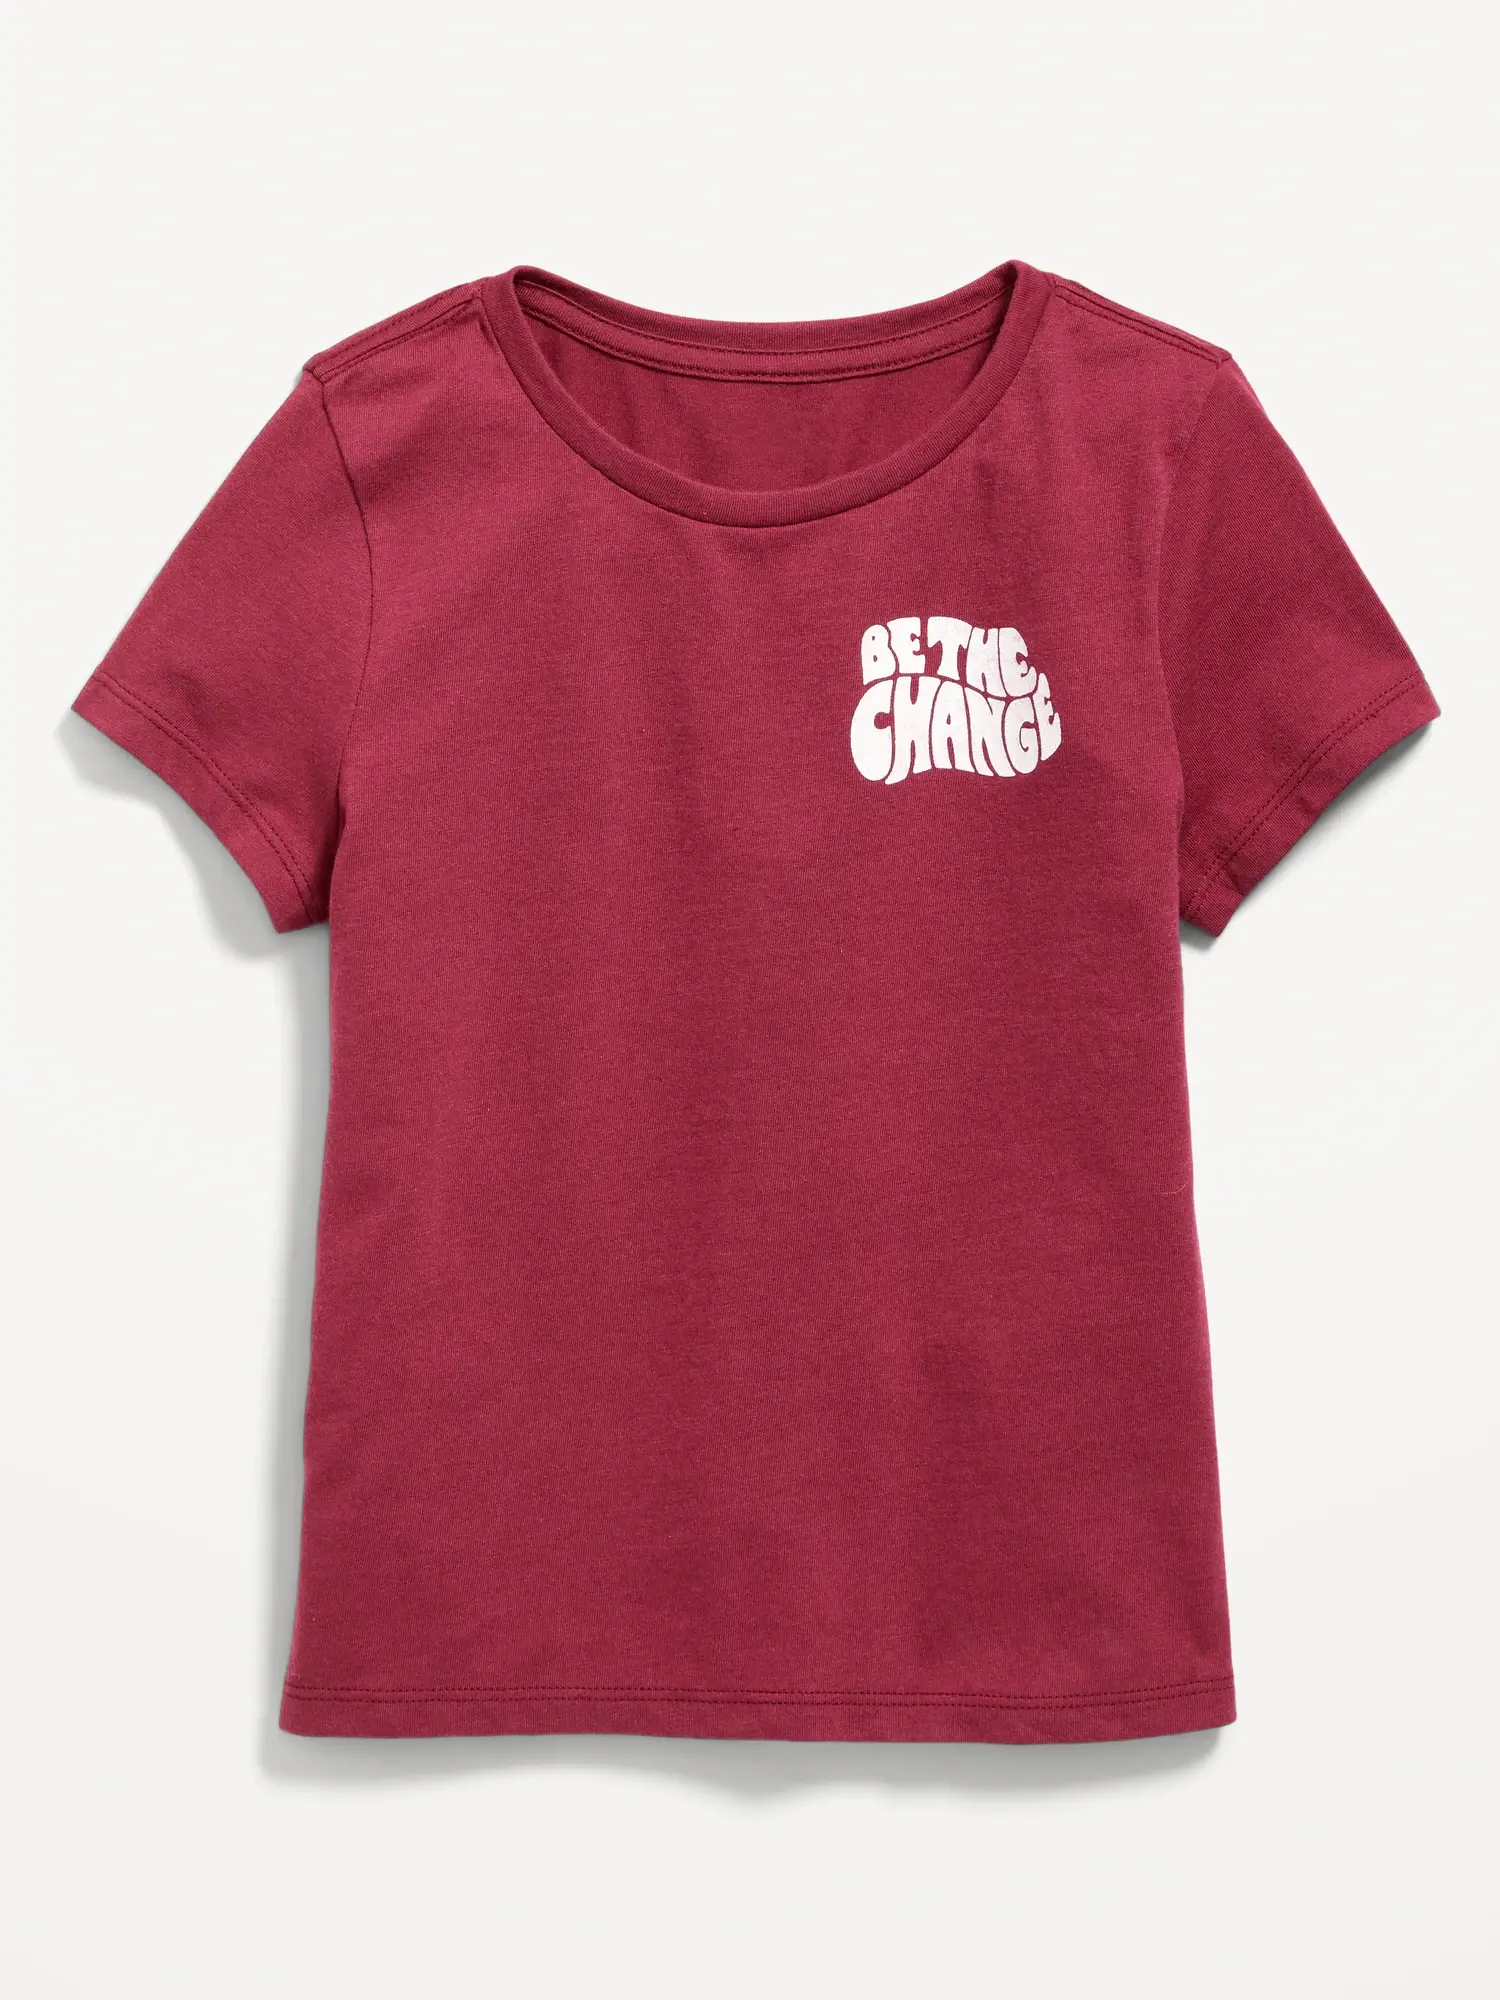 Old Navy Short-Sleeve Graphic T-Shirt for Girls red. 1